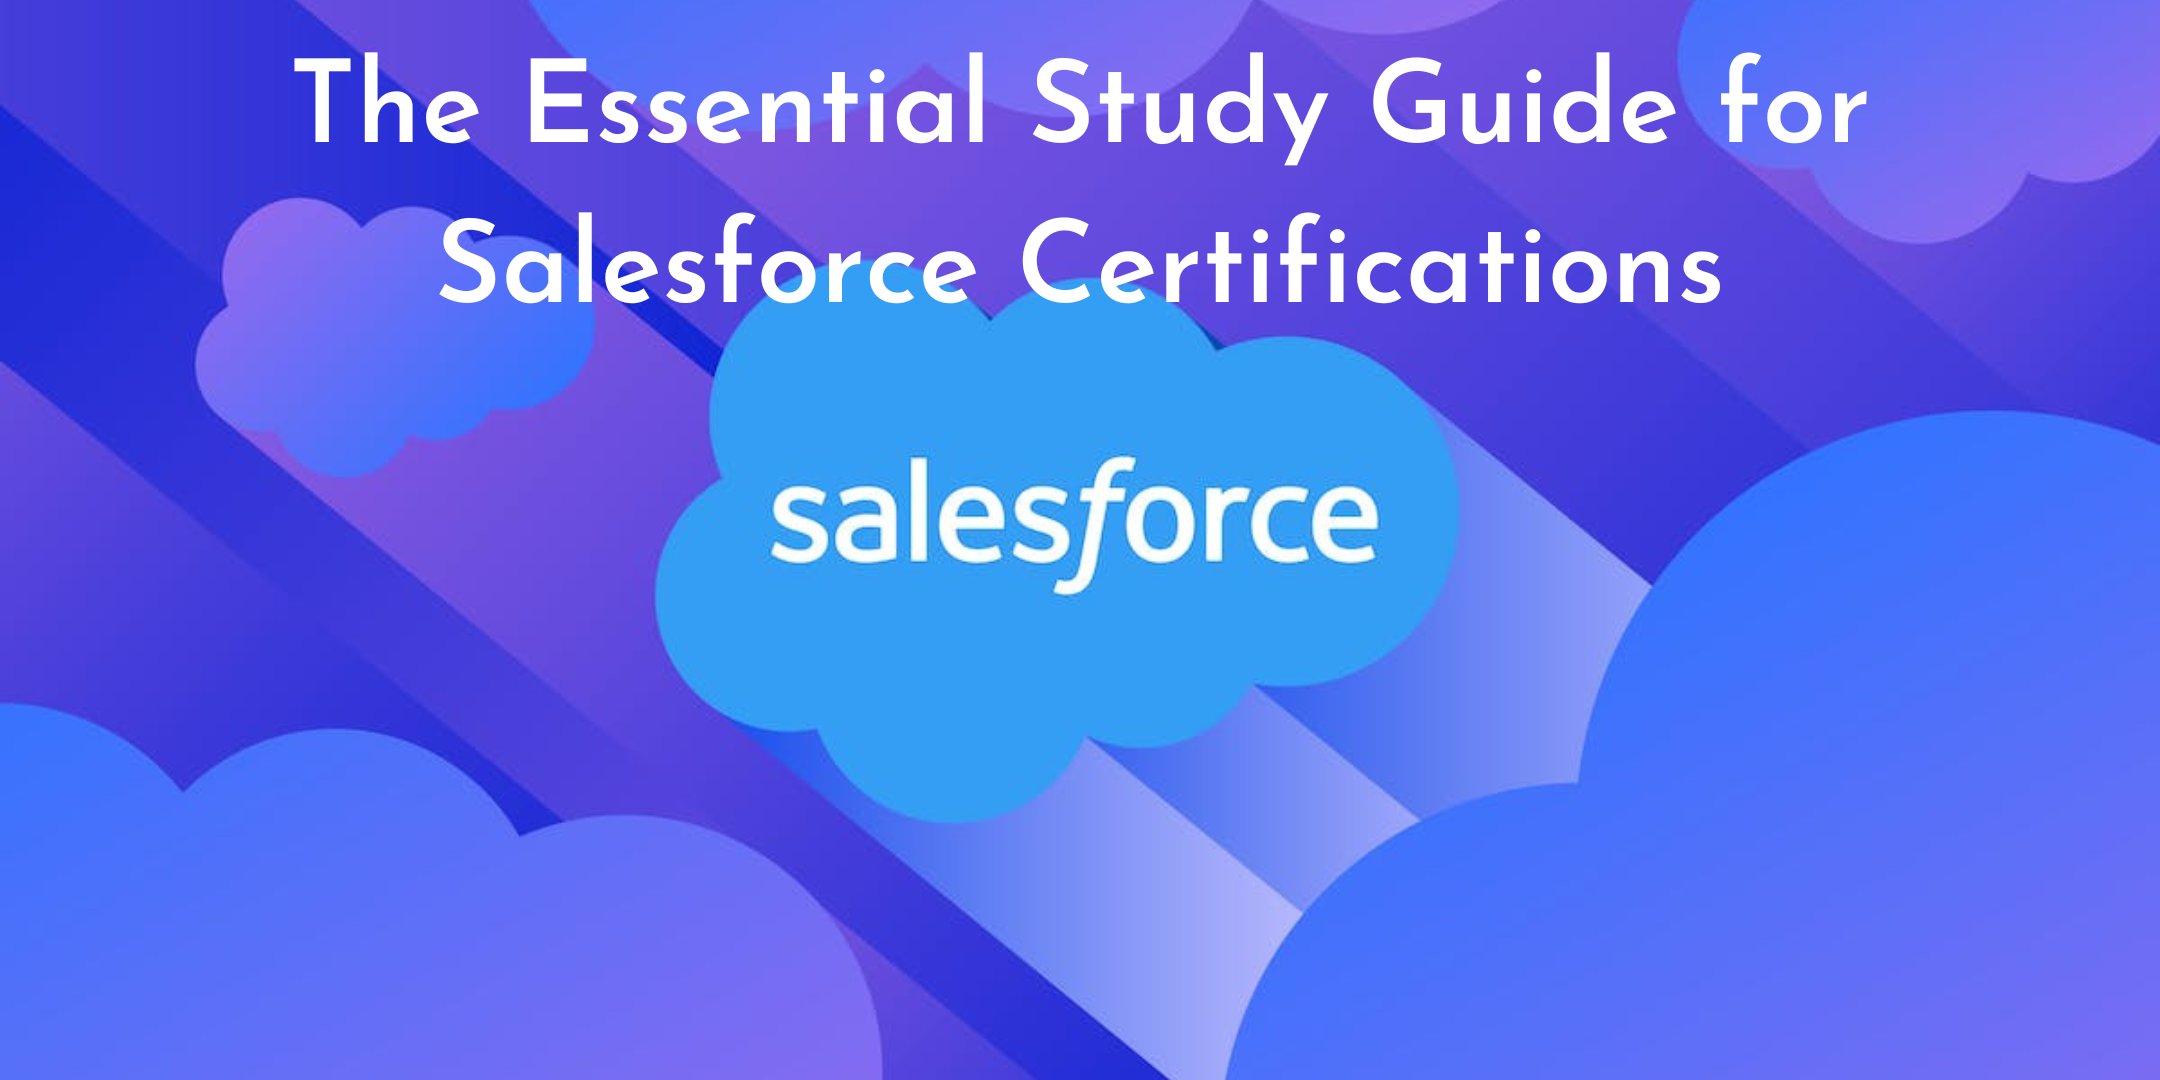 Salesforce Certifications – The Essential Study Guide